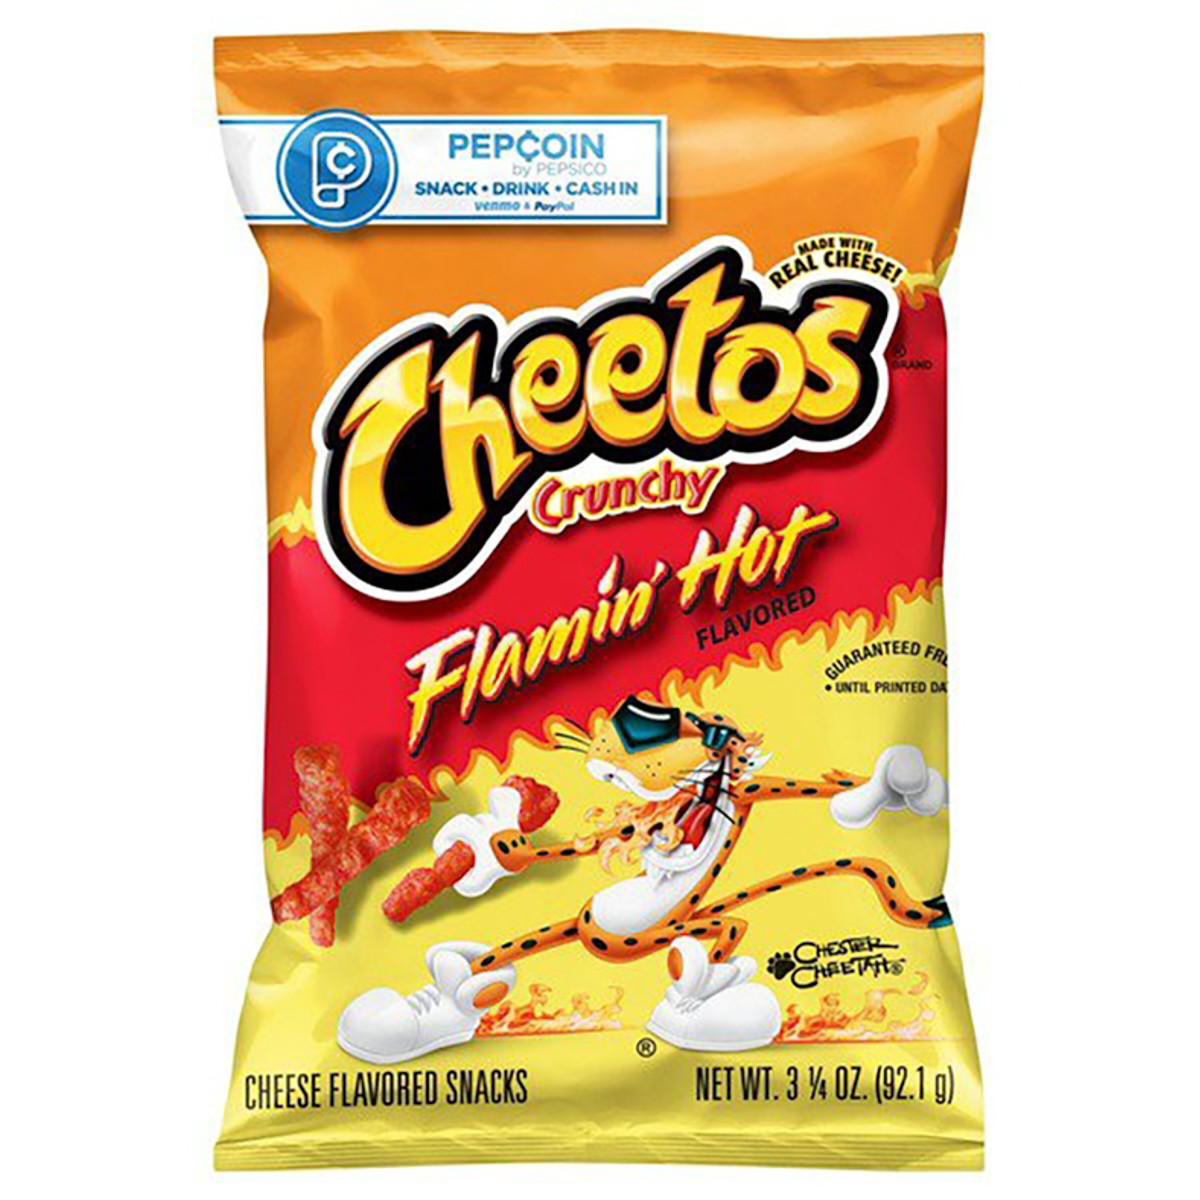 Chester's Flamin' Hot Fries - 2.625 Ounce Bags - 6ct Box